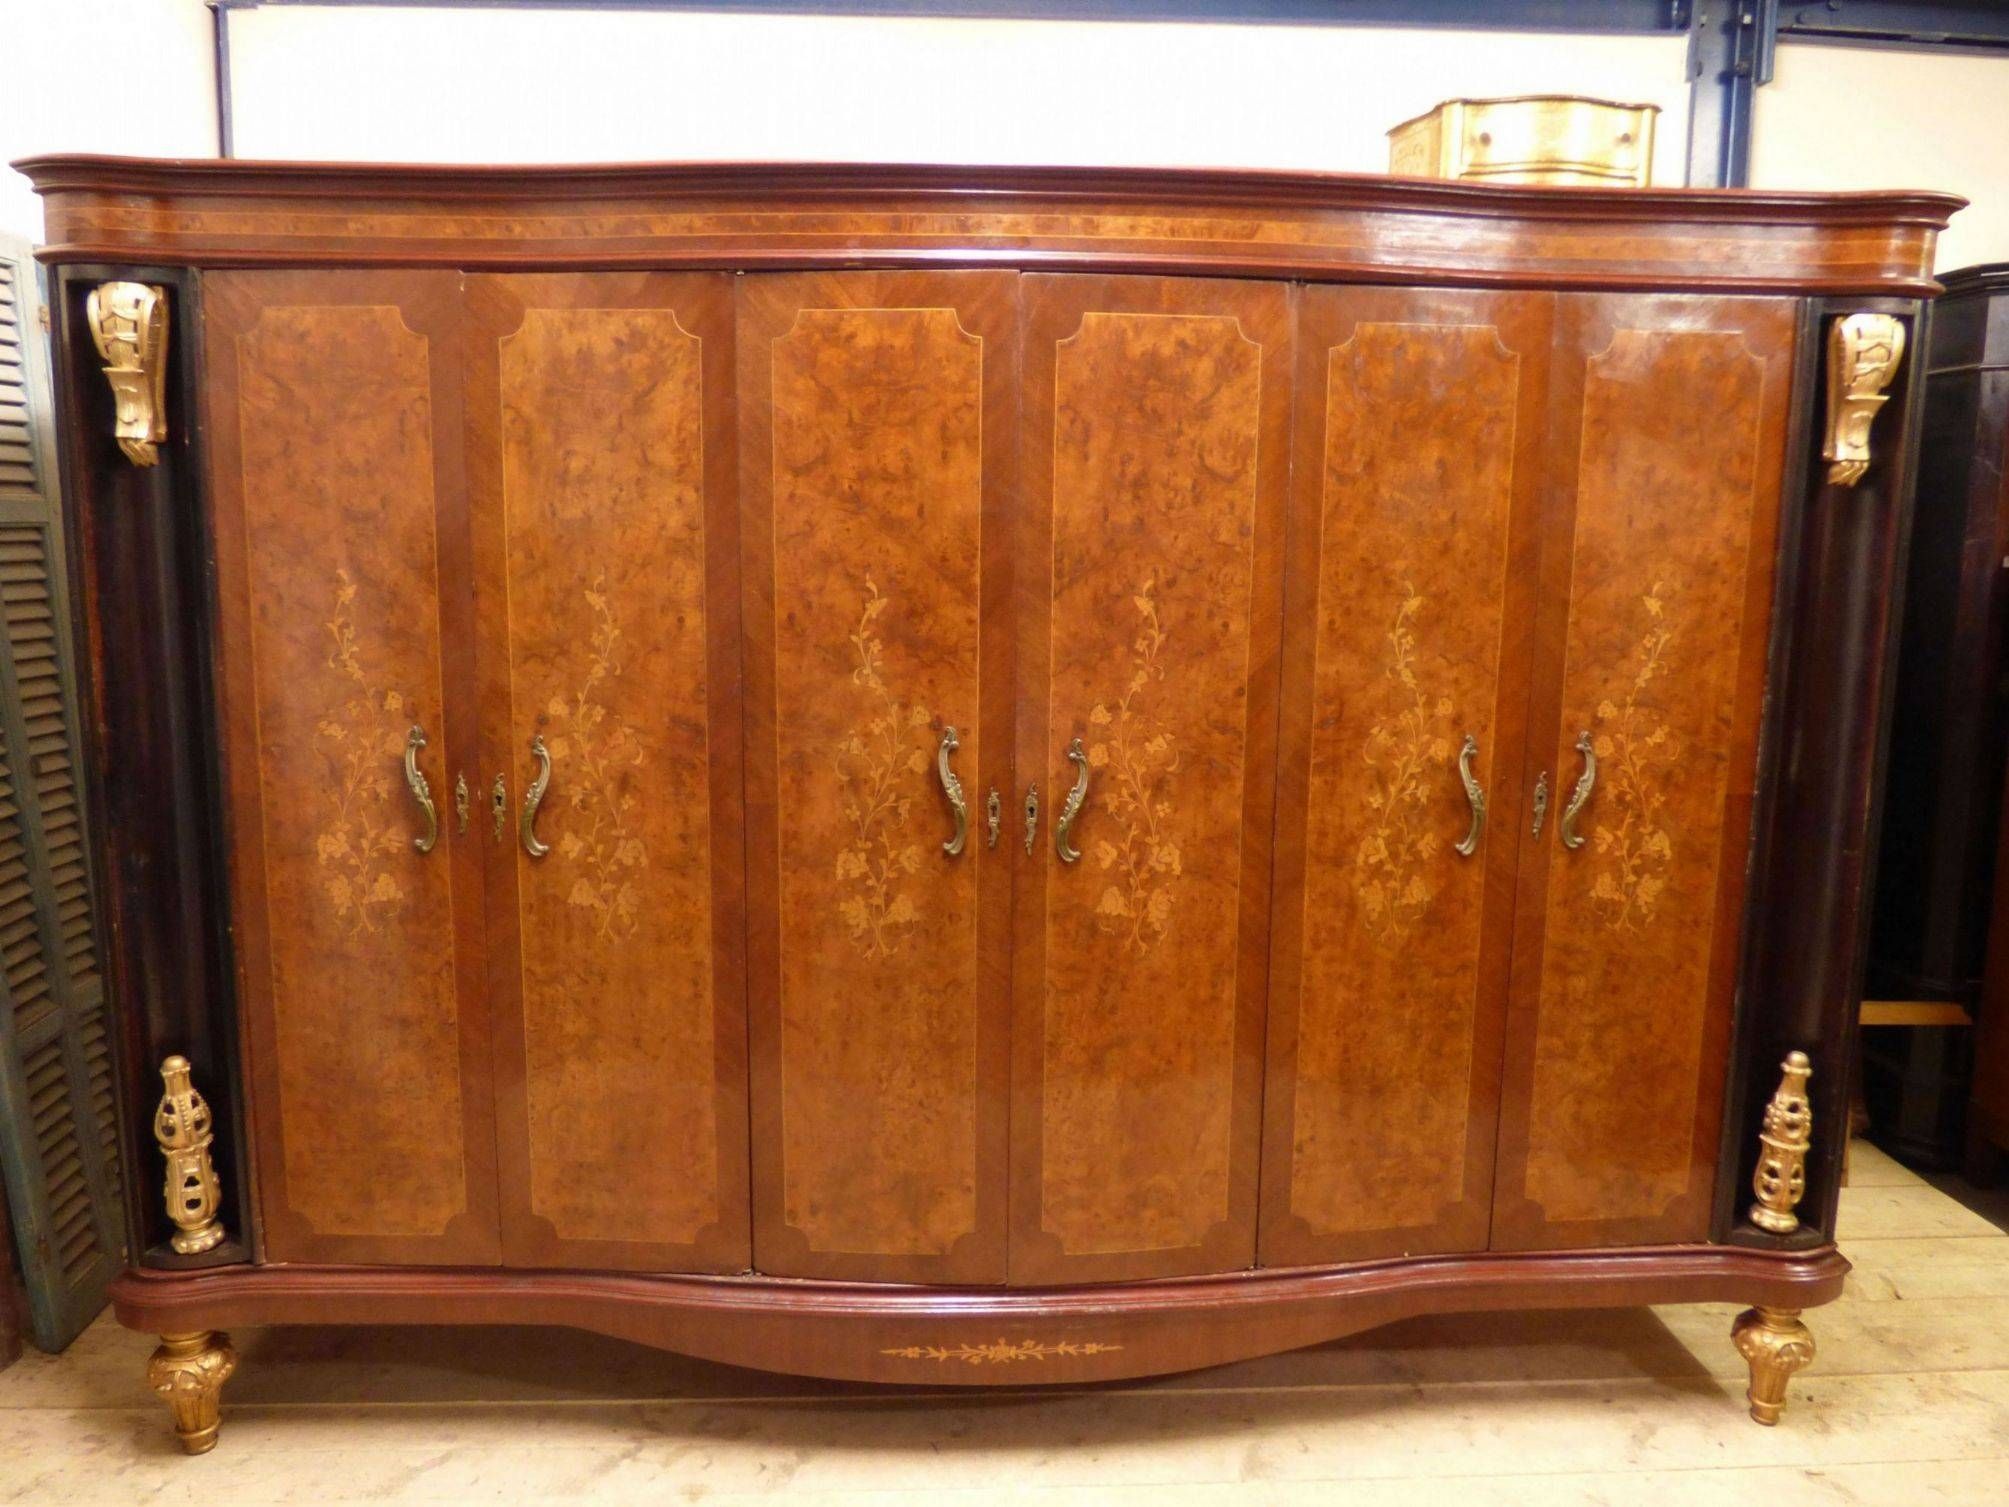 Large Impressive Vintage French Armoire Wardrobe – Wt43 – The Pertaining To French Armoire Wardrobes (View 8 of 15)